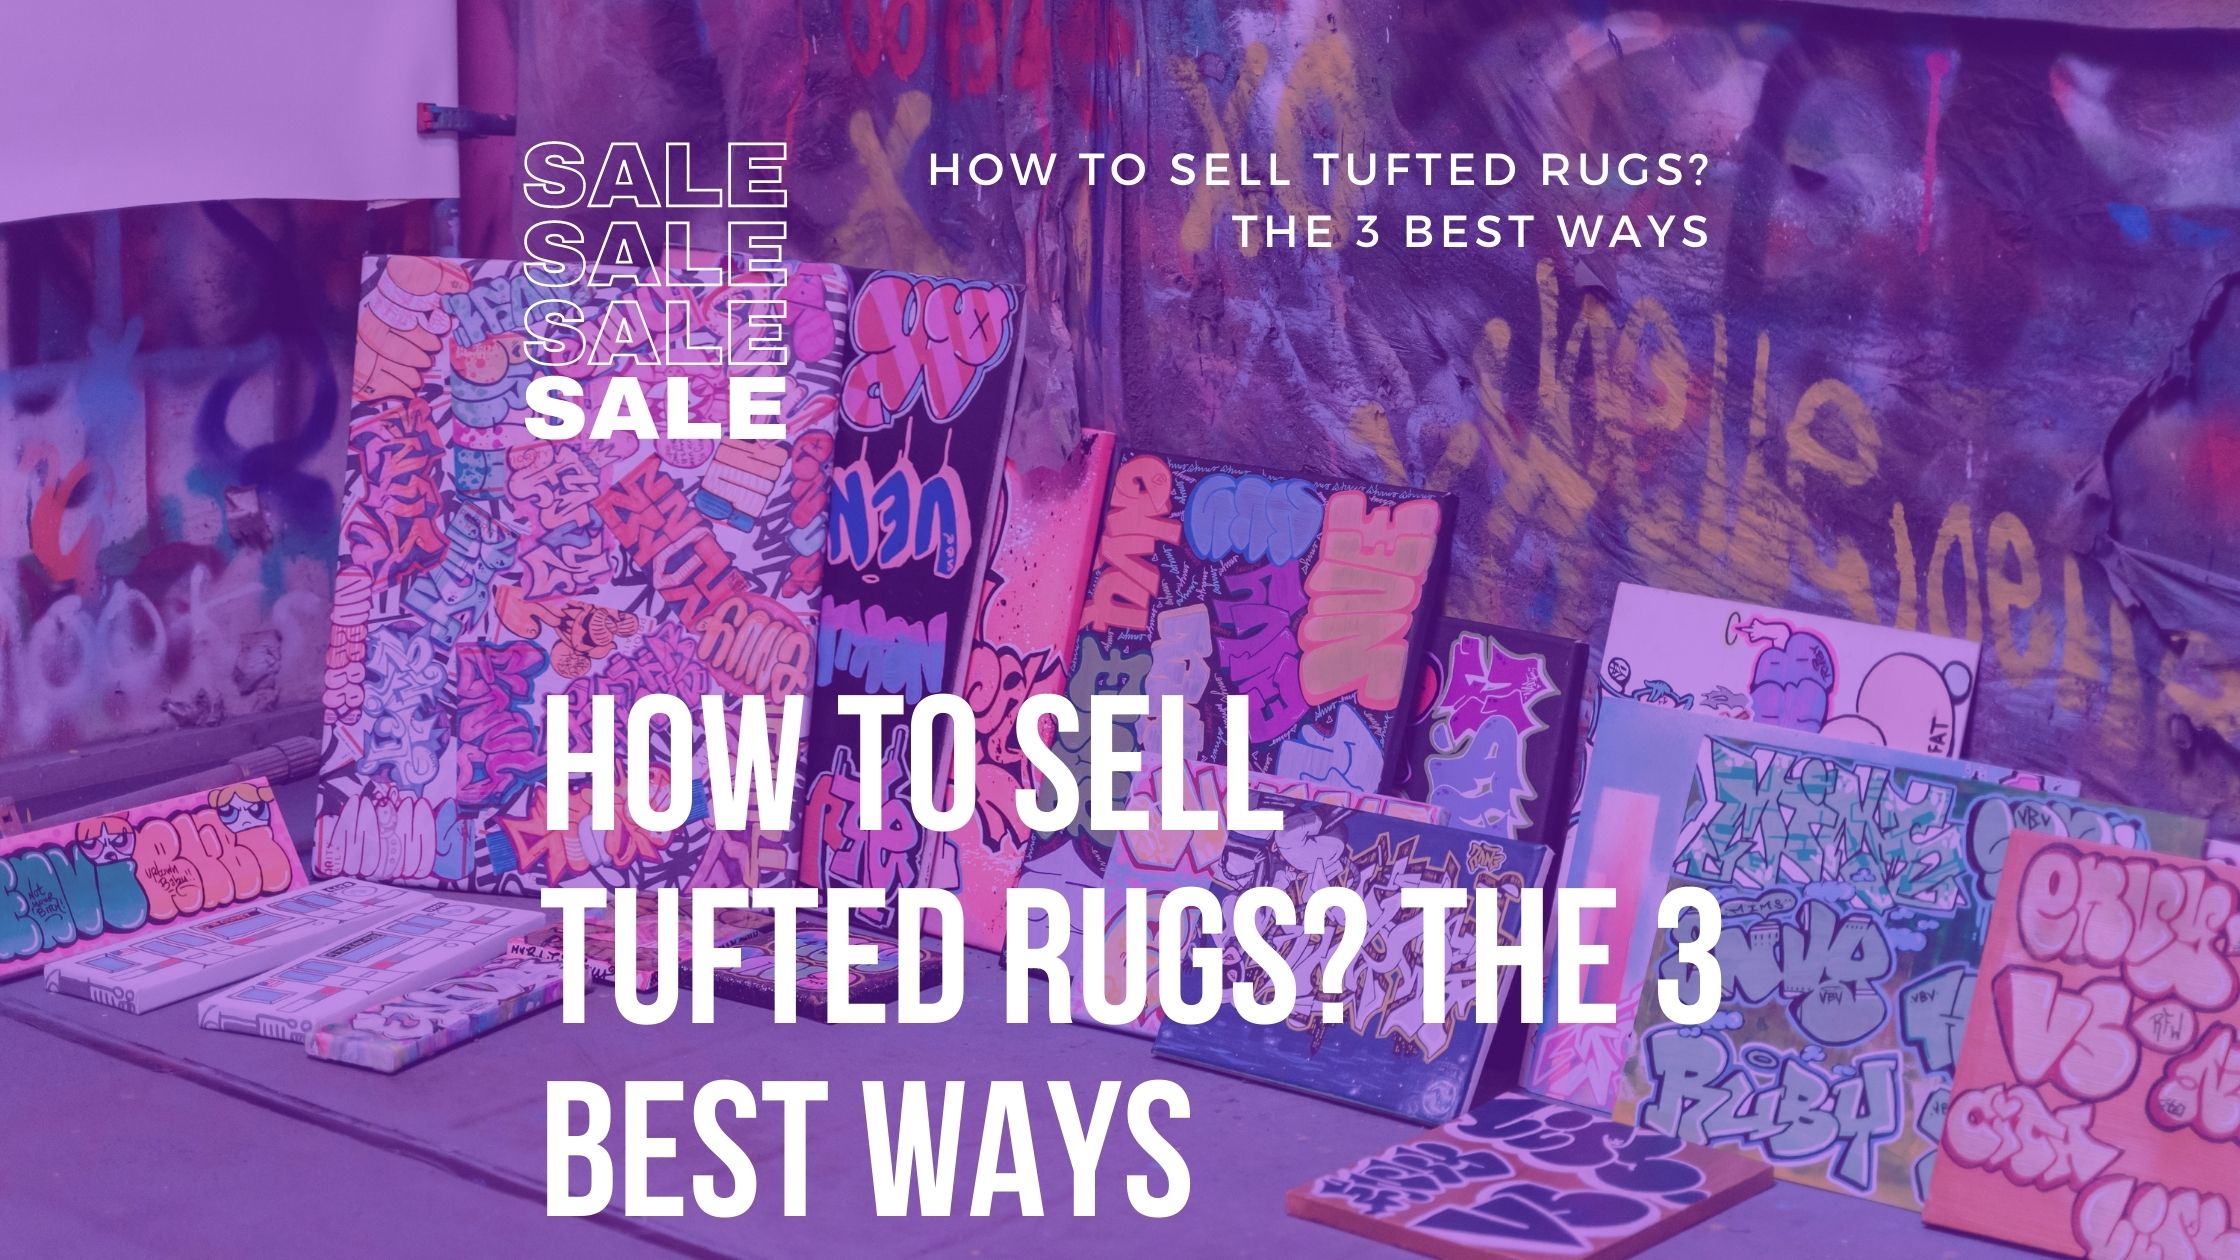 How To Sell Tufted Rugs? The 3 Best Ways